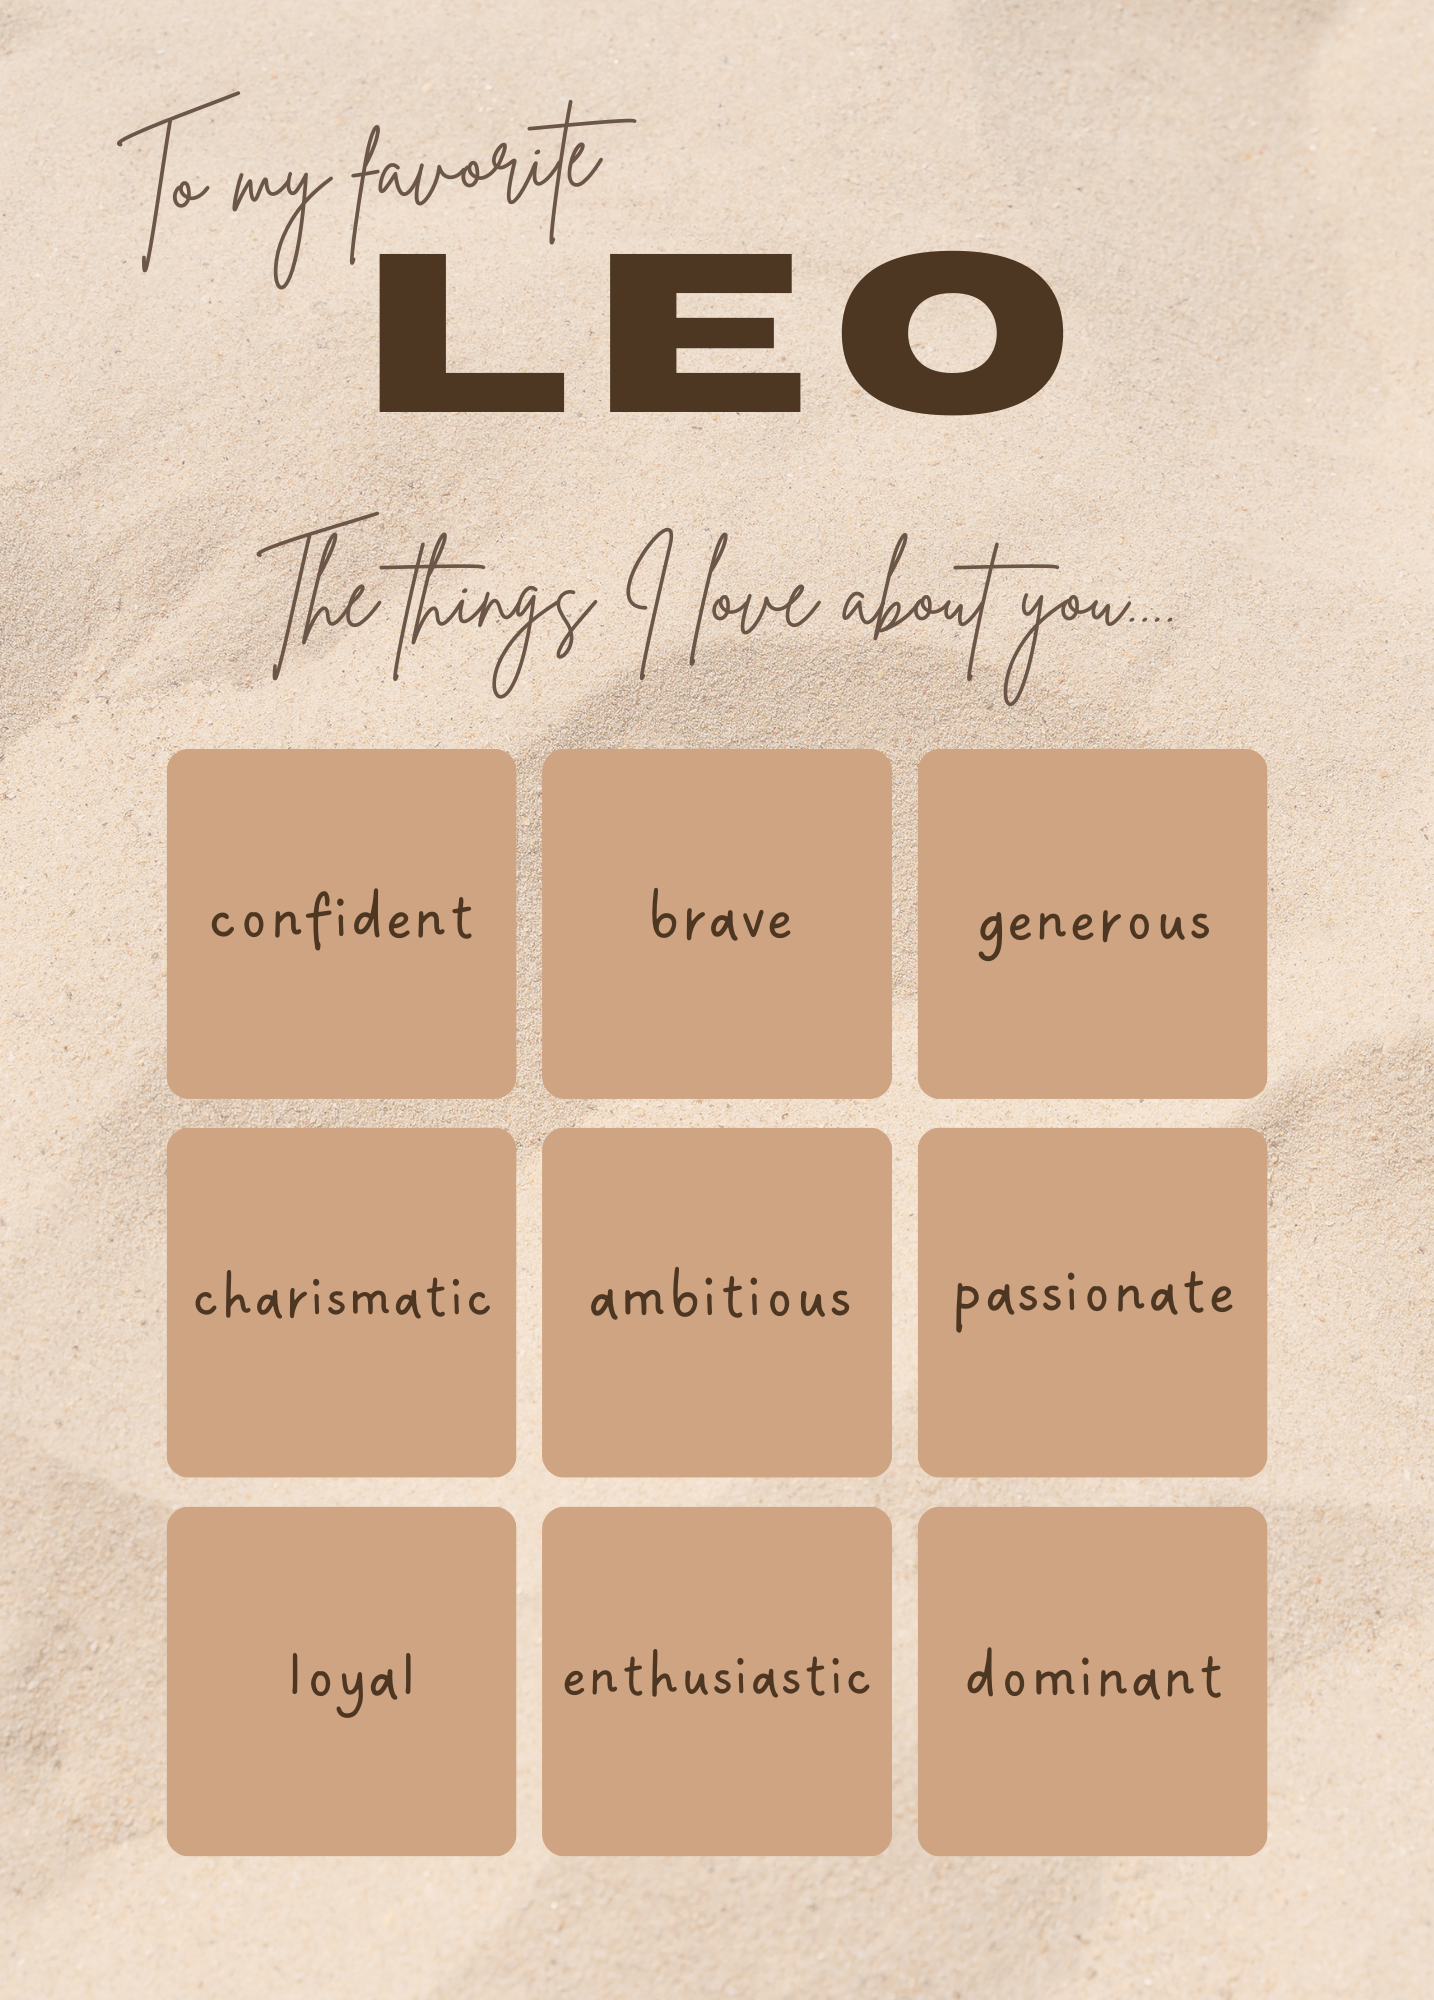 To My Favorite Leo, The Things I Love About You